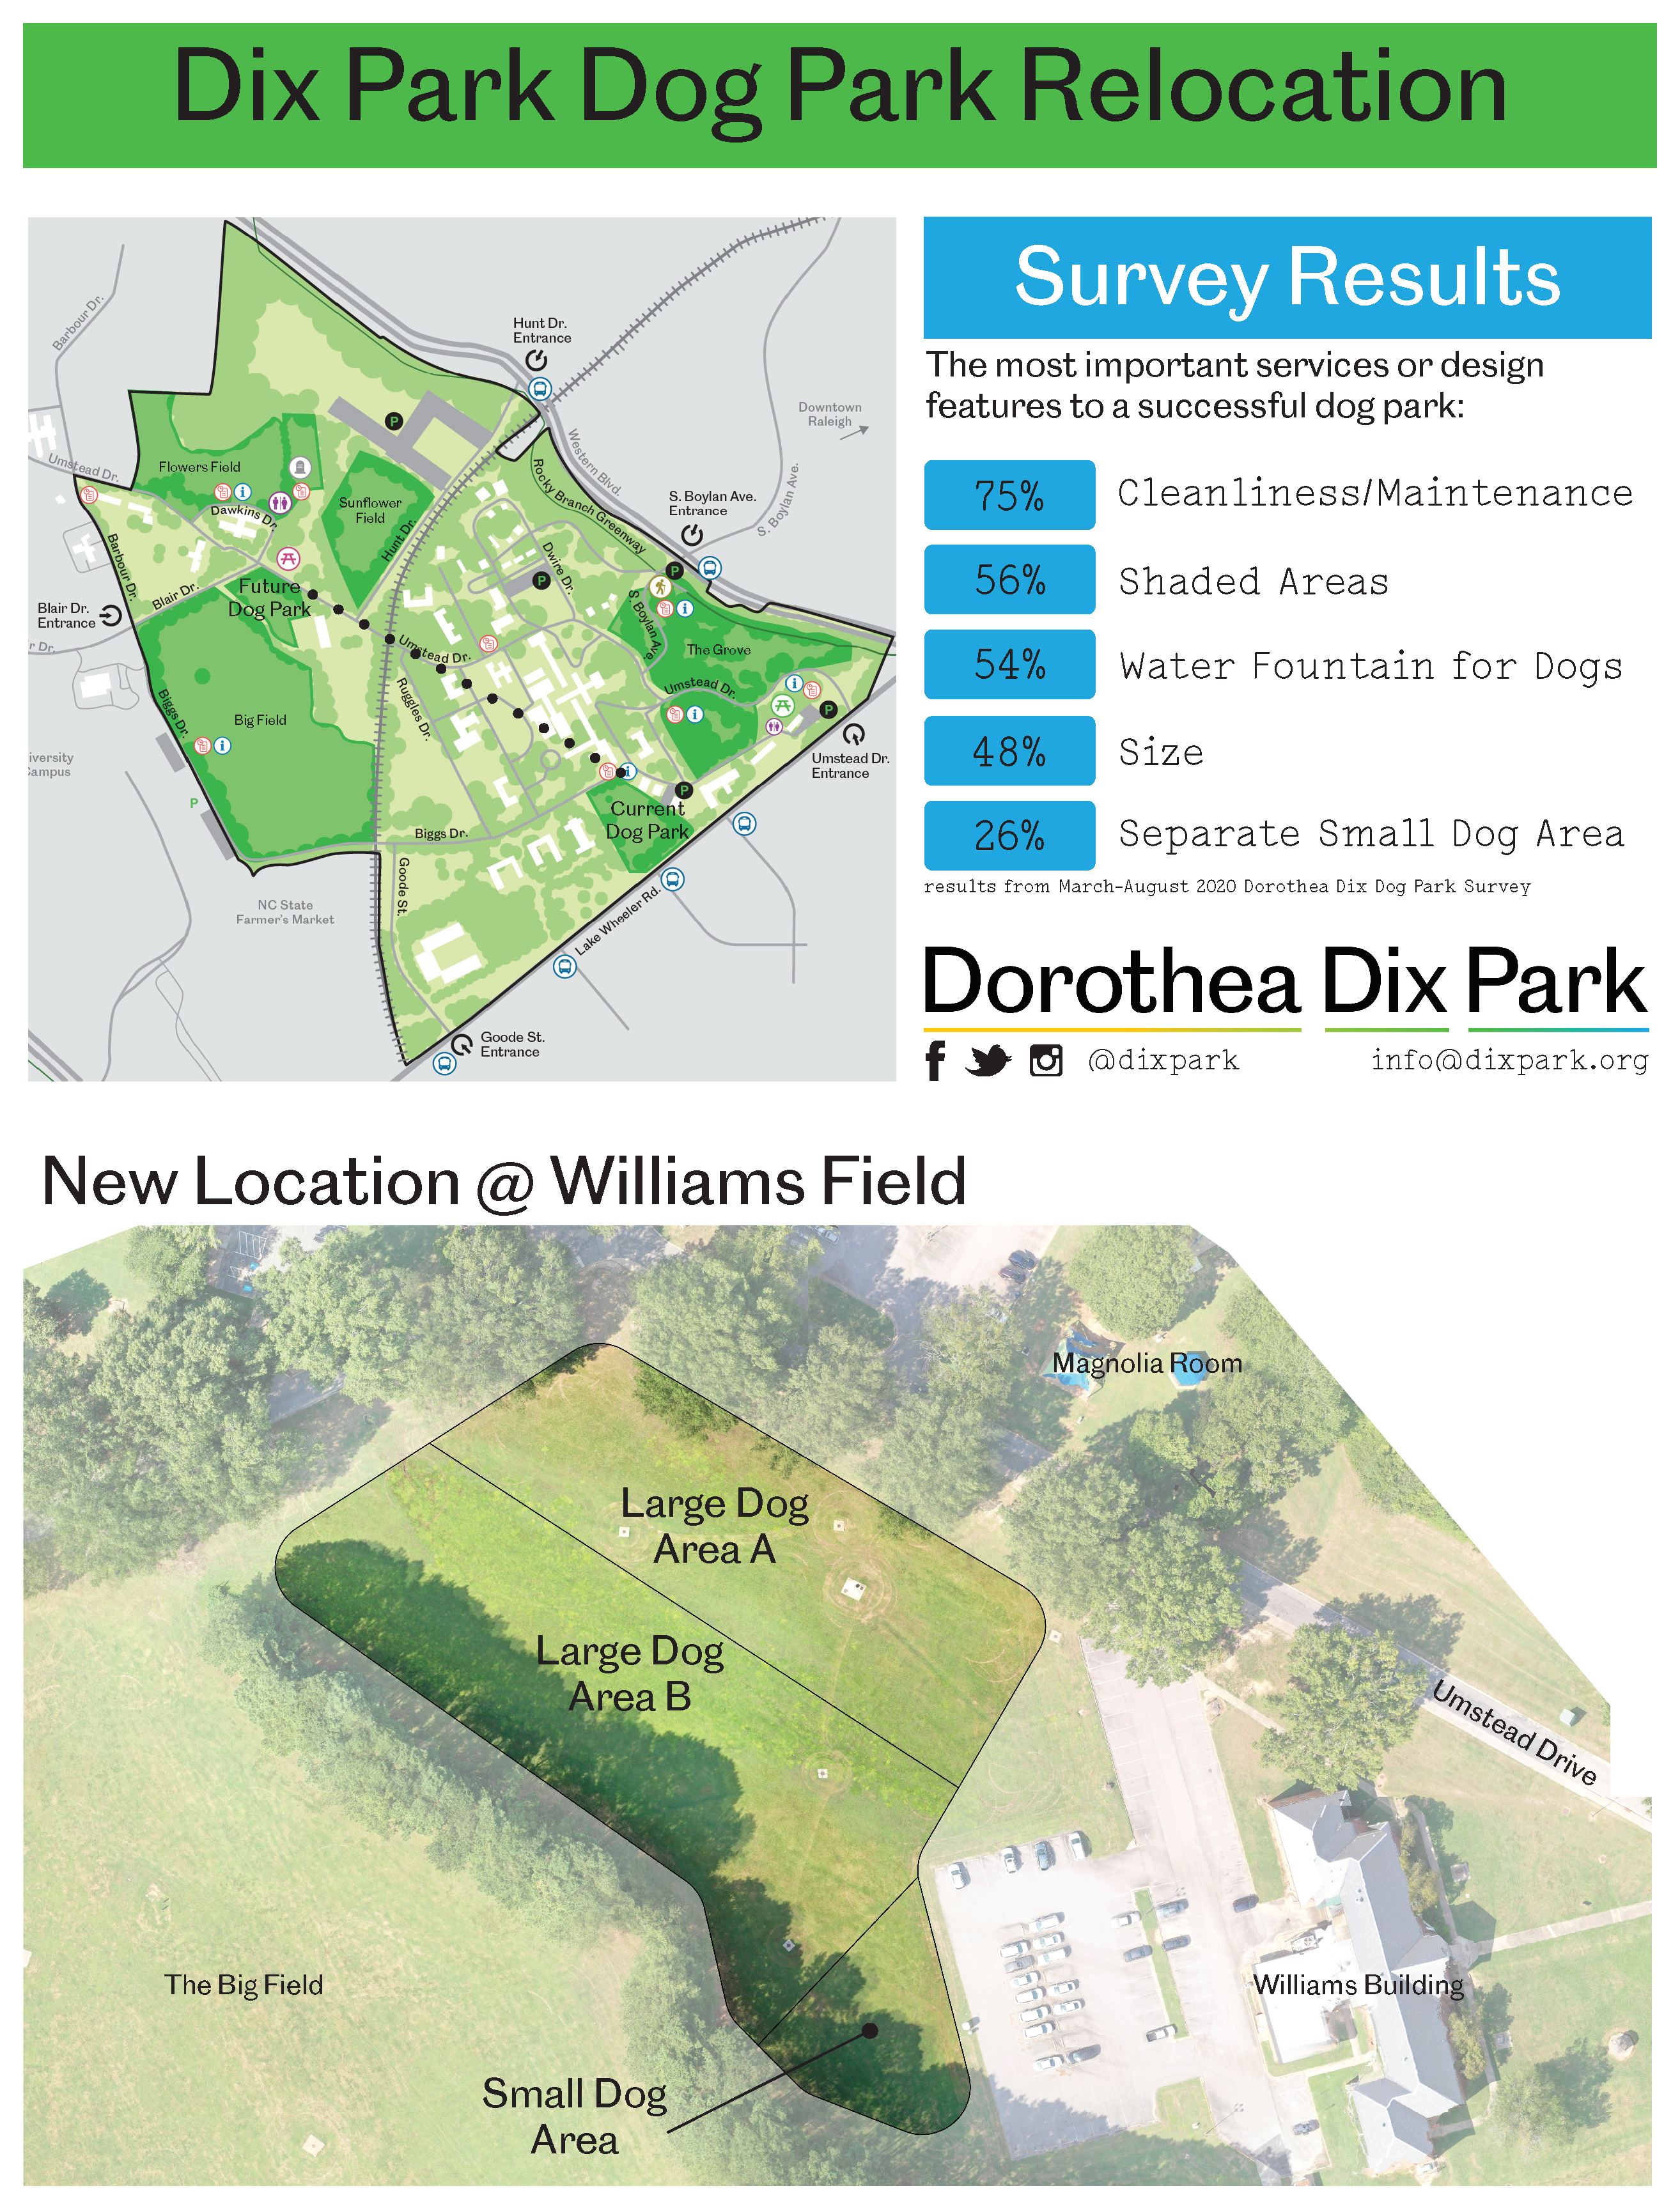 Dix Park Dog Park Survey Results and New Location Map